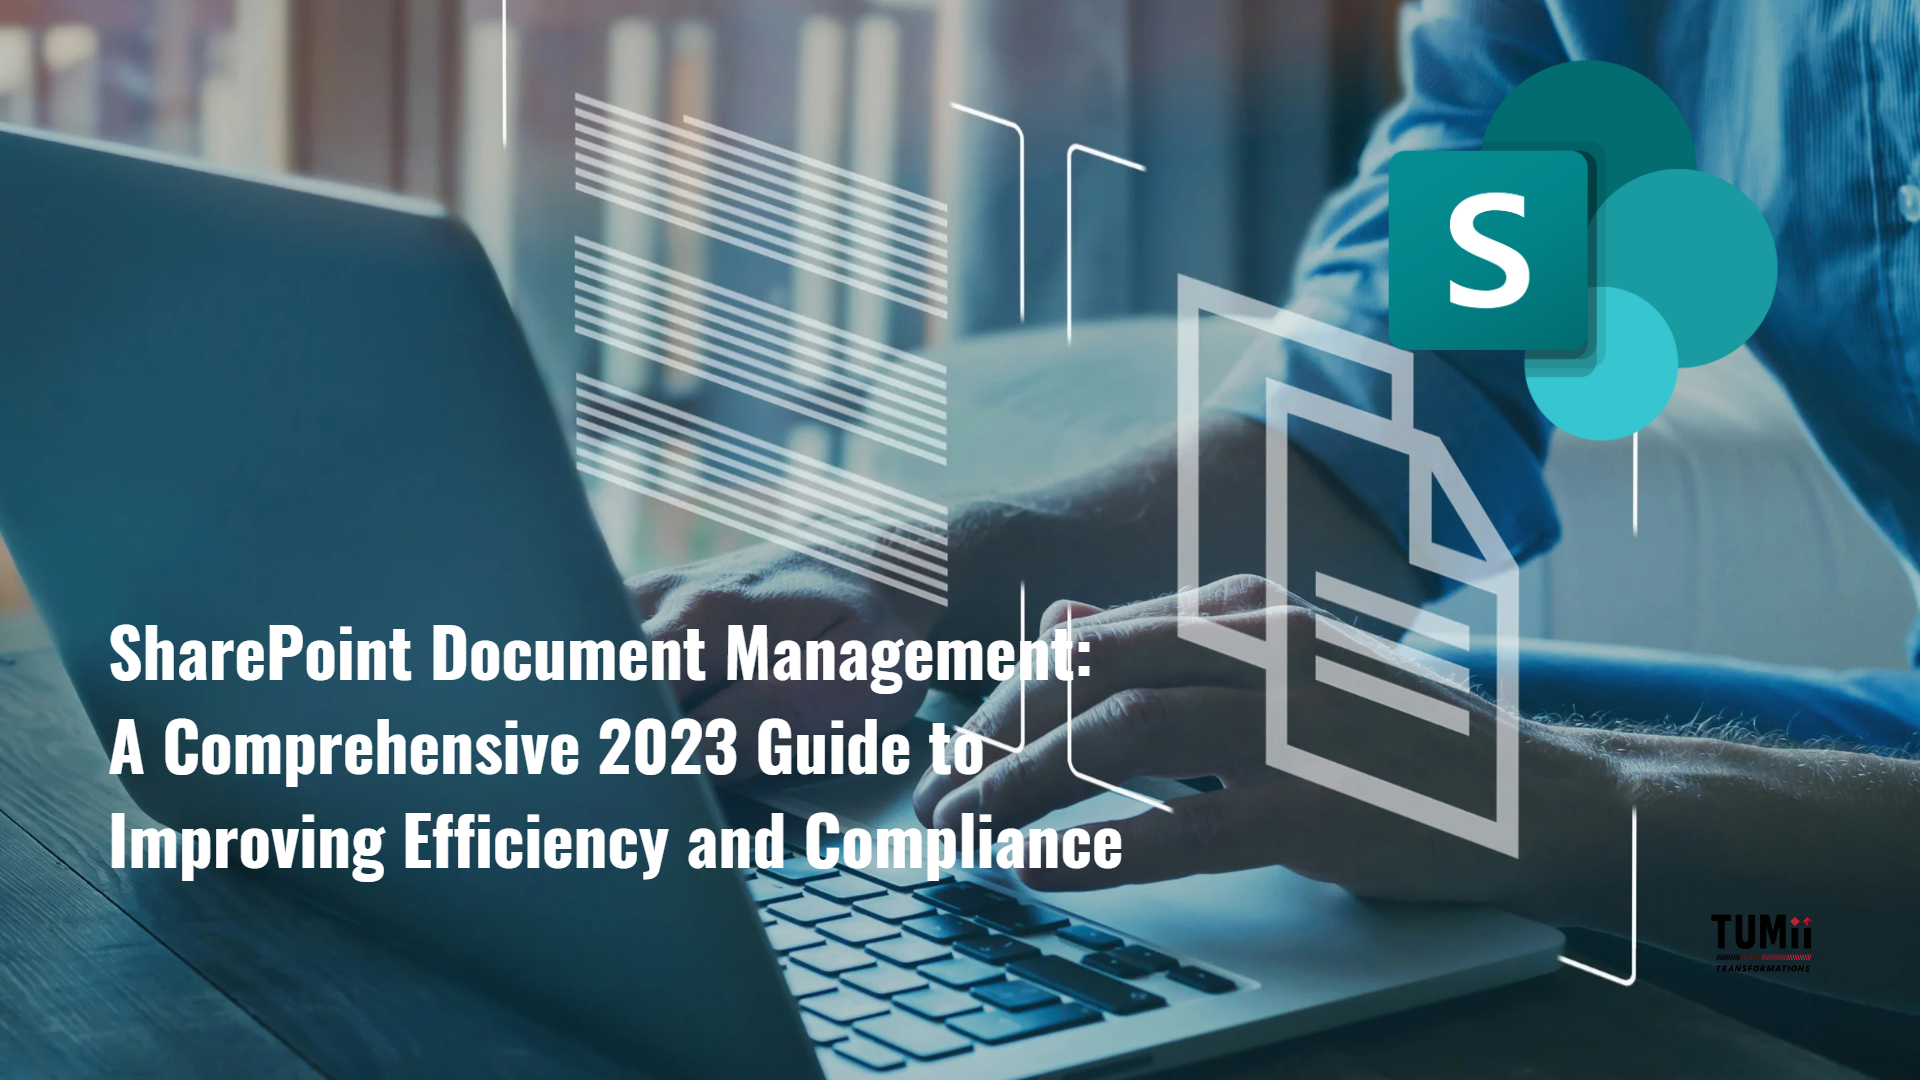 SharePoint Document Management: A Comprehensive 2023 Guide to Improving Efficiency and Compliance 